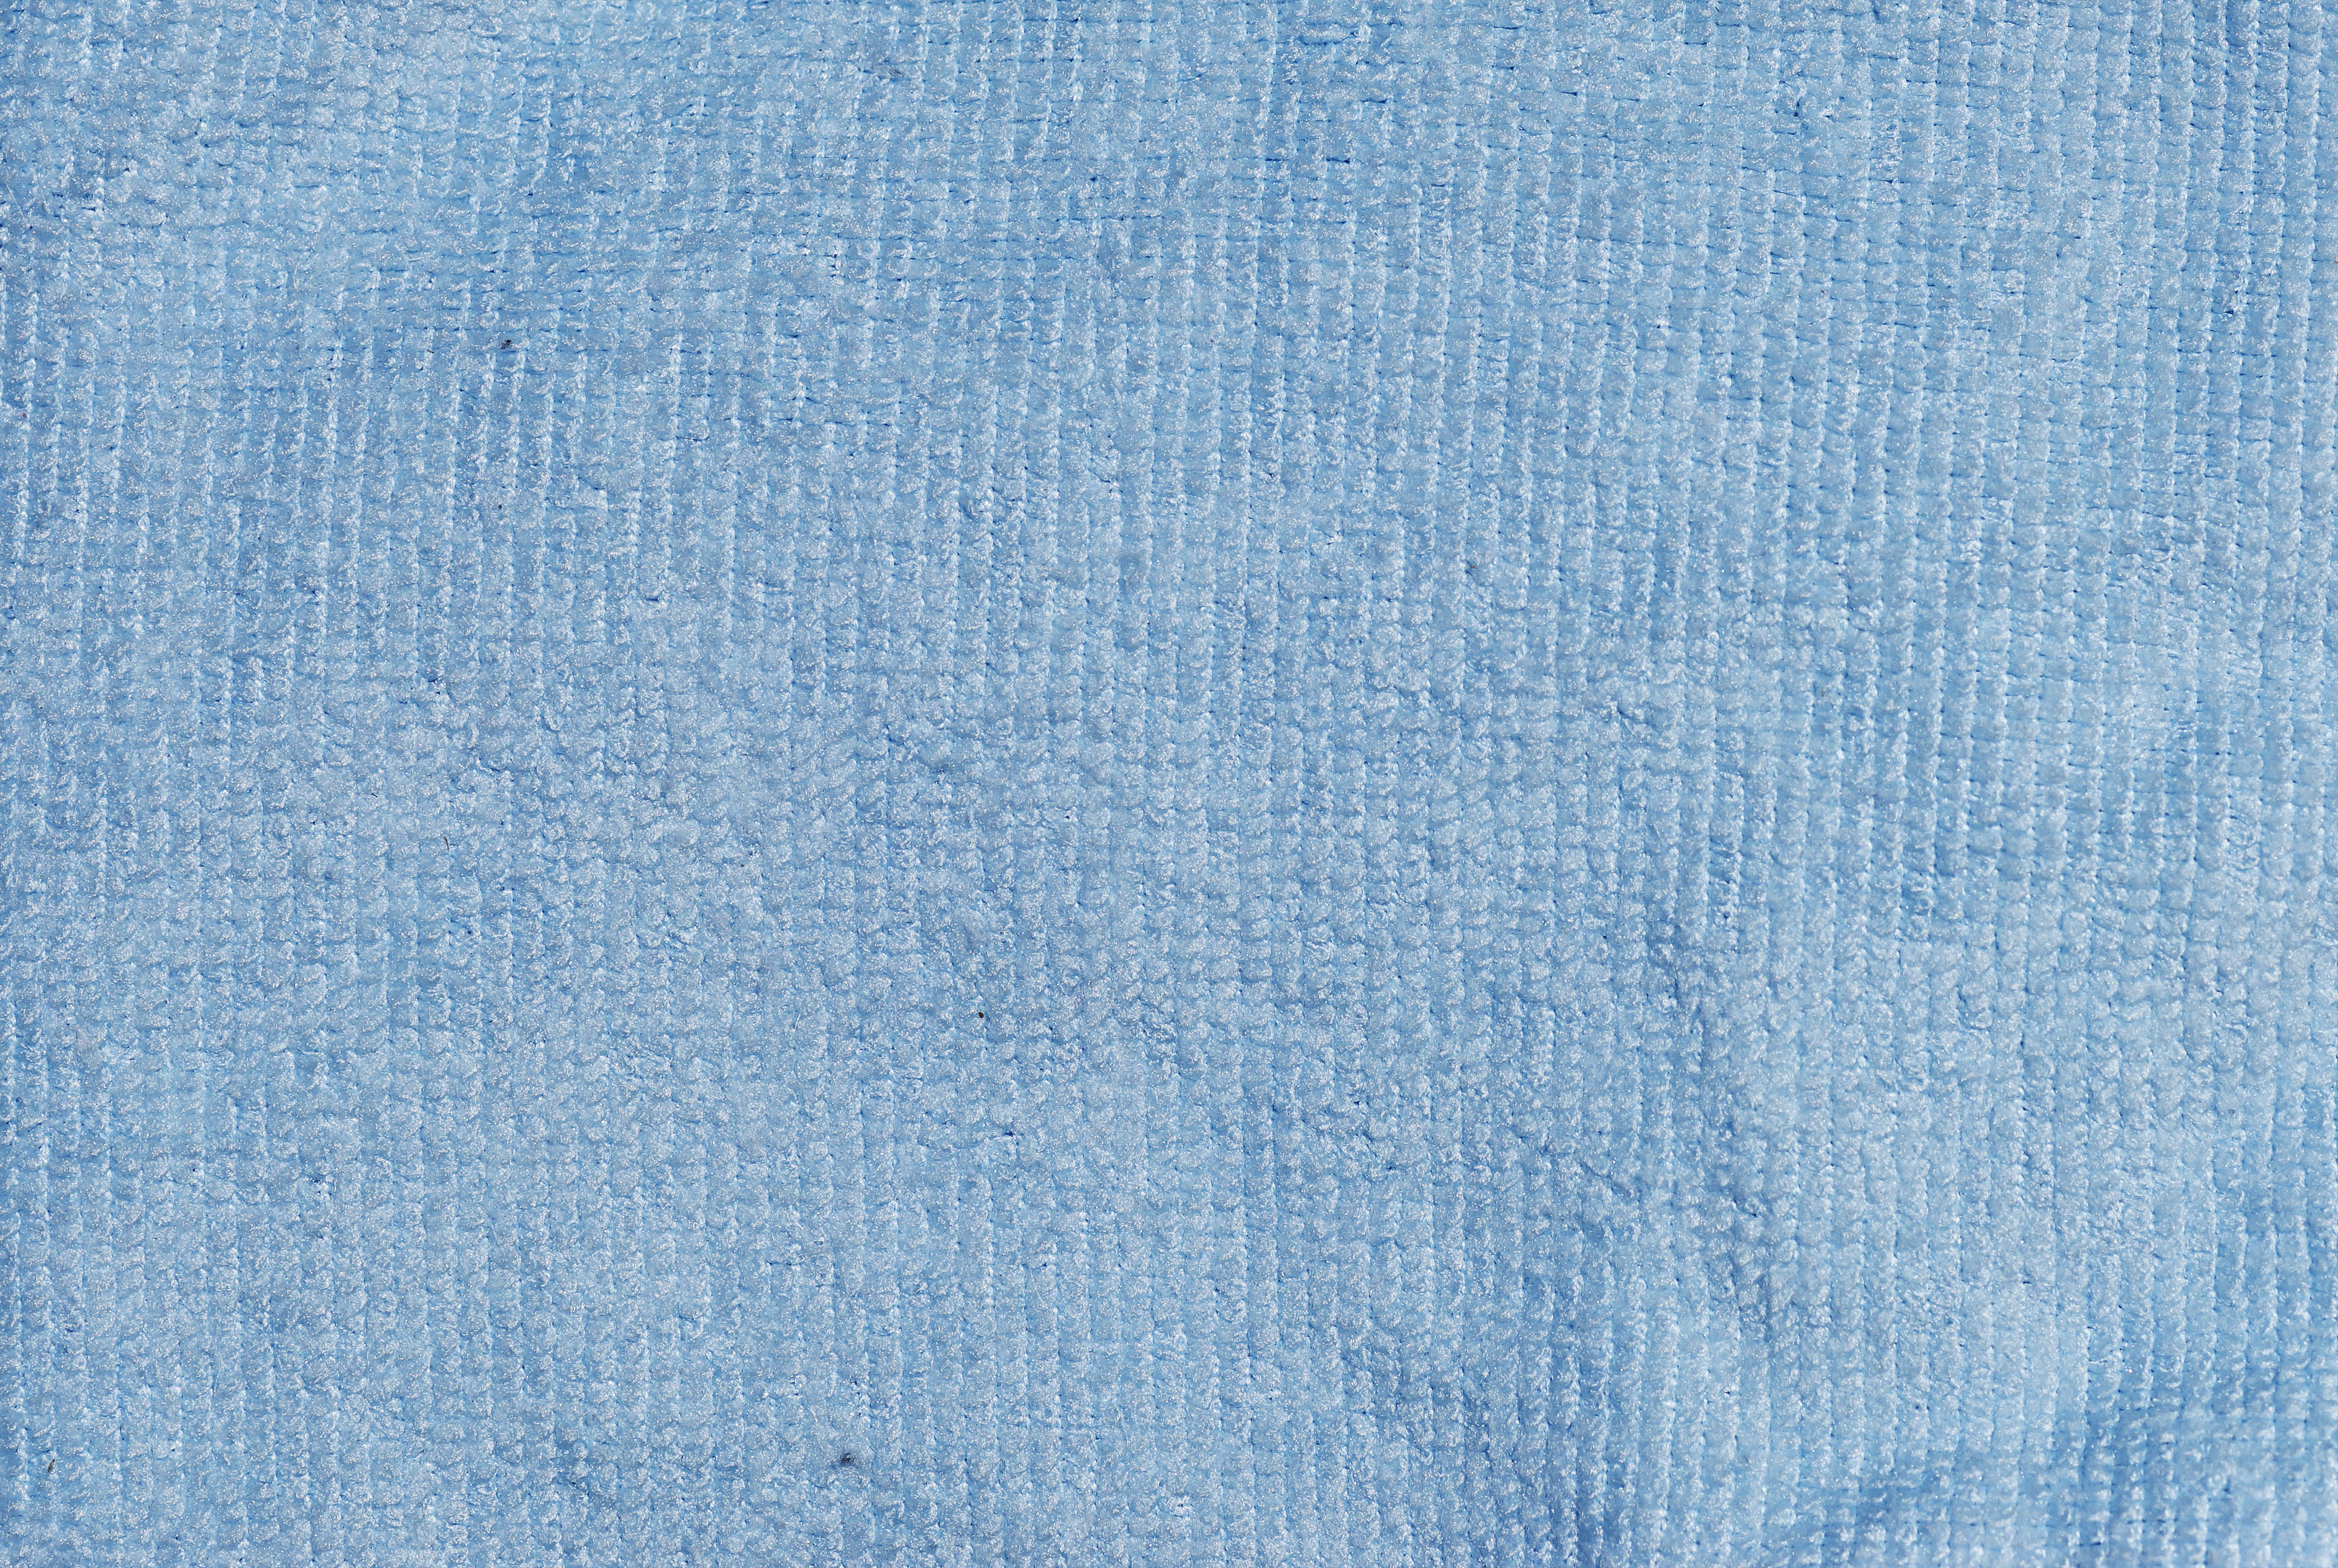 Two free cloth towel texture images